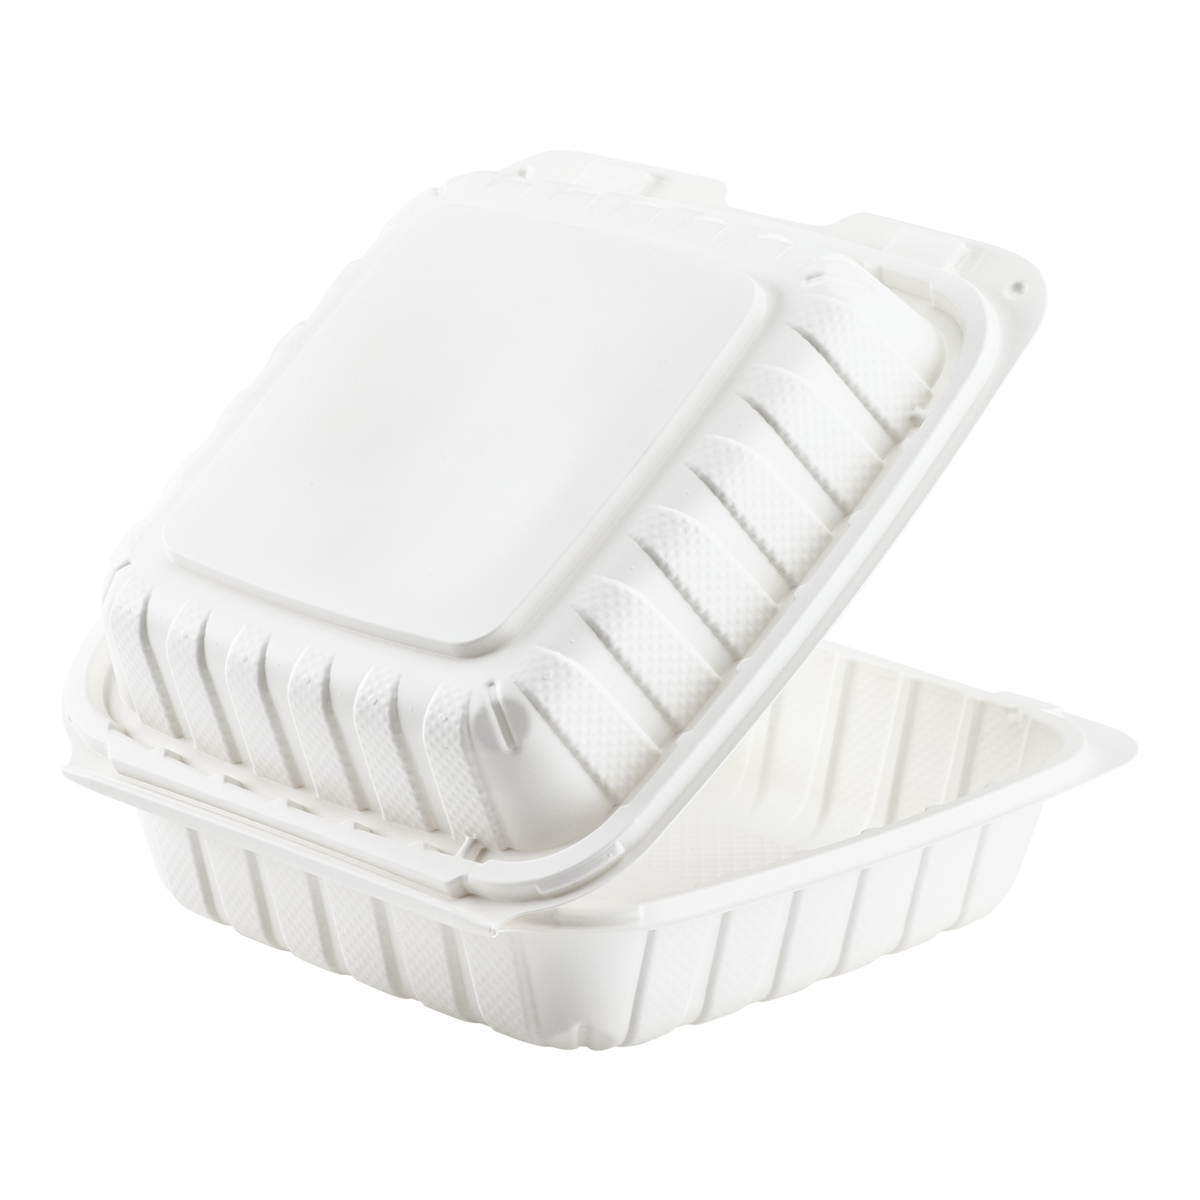 Takeout Containers & Boxes